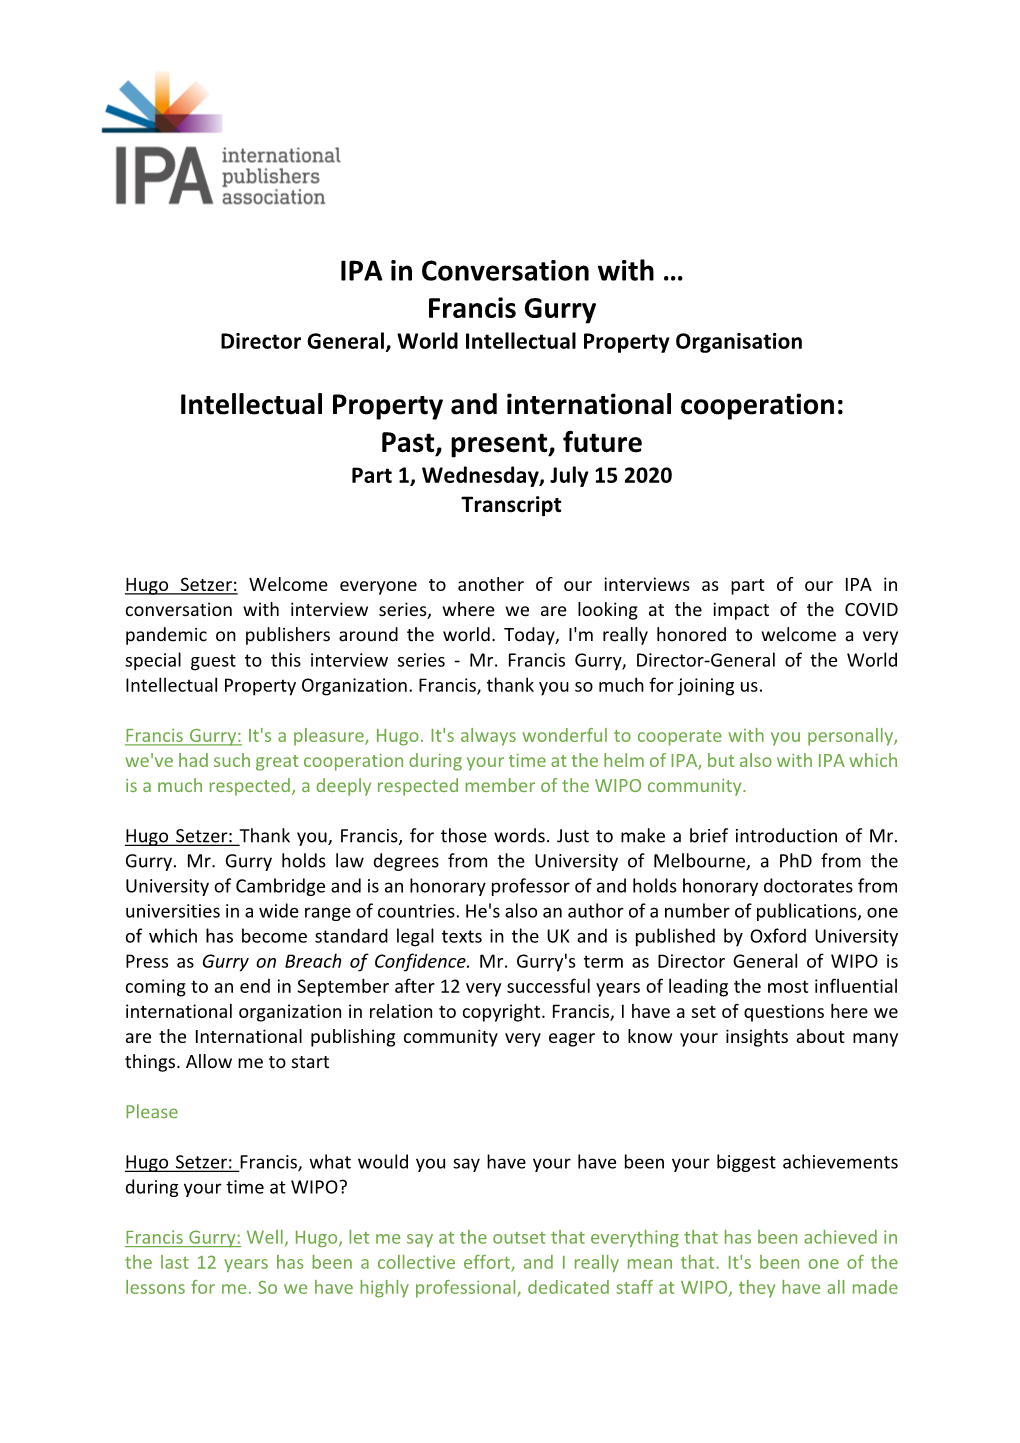 IPA in Conversation with … Francis Gurry Intellectual Property And